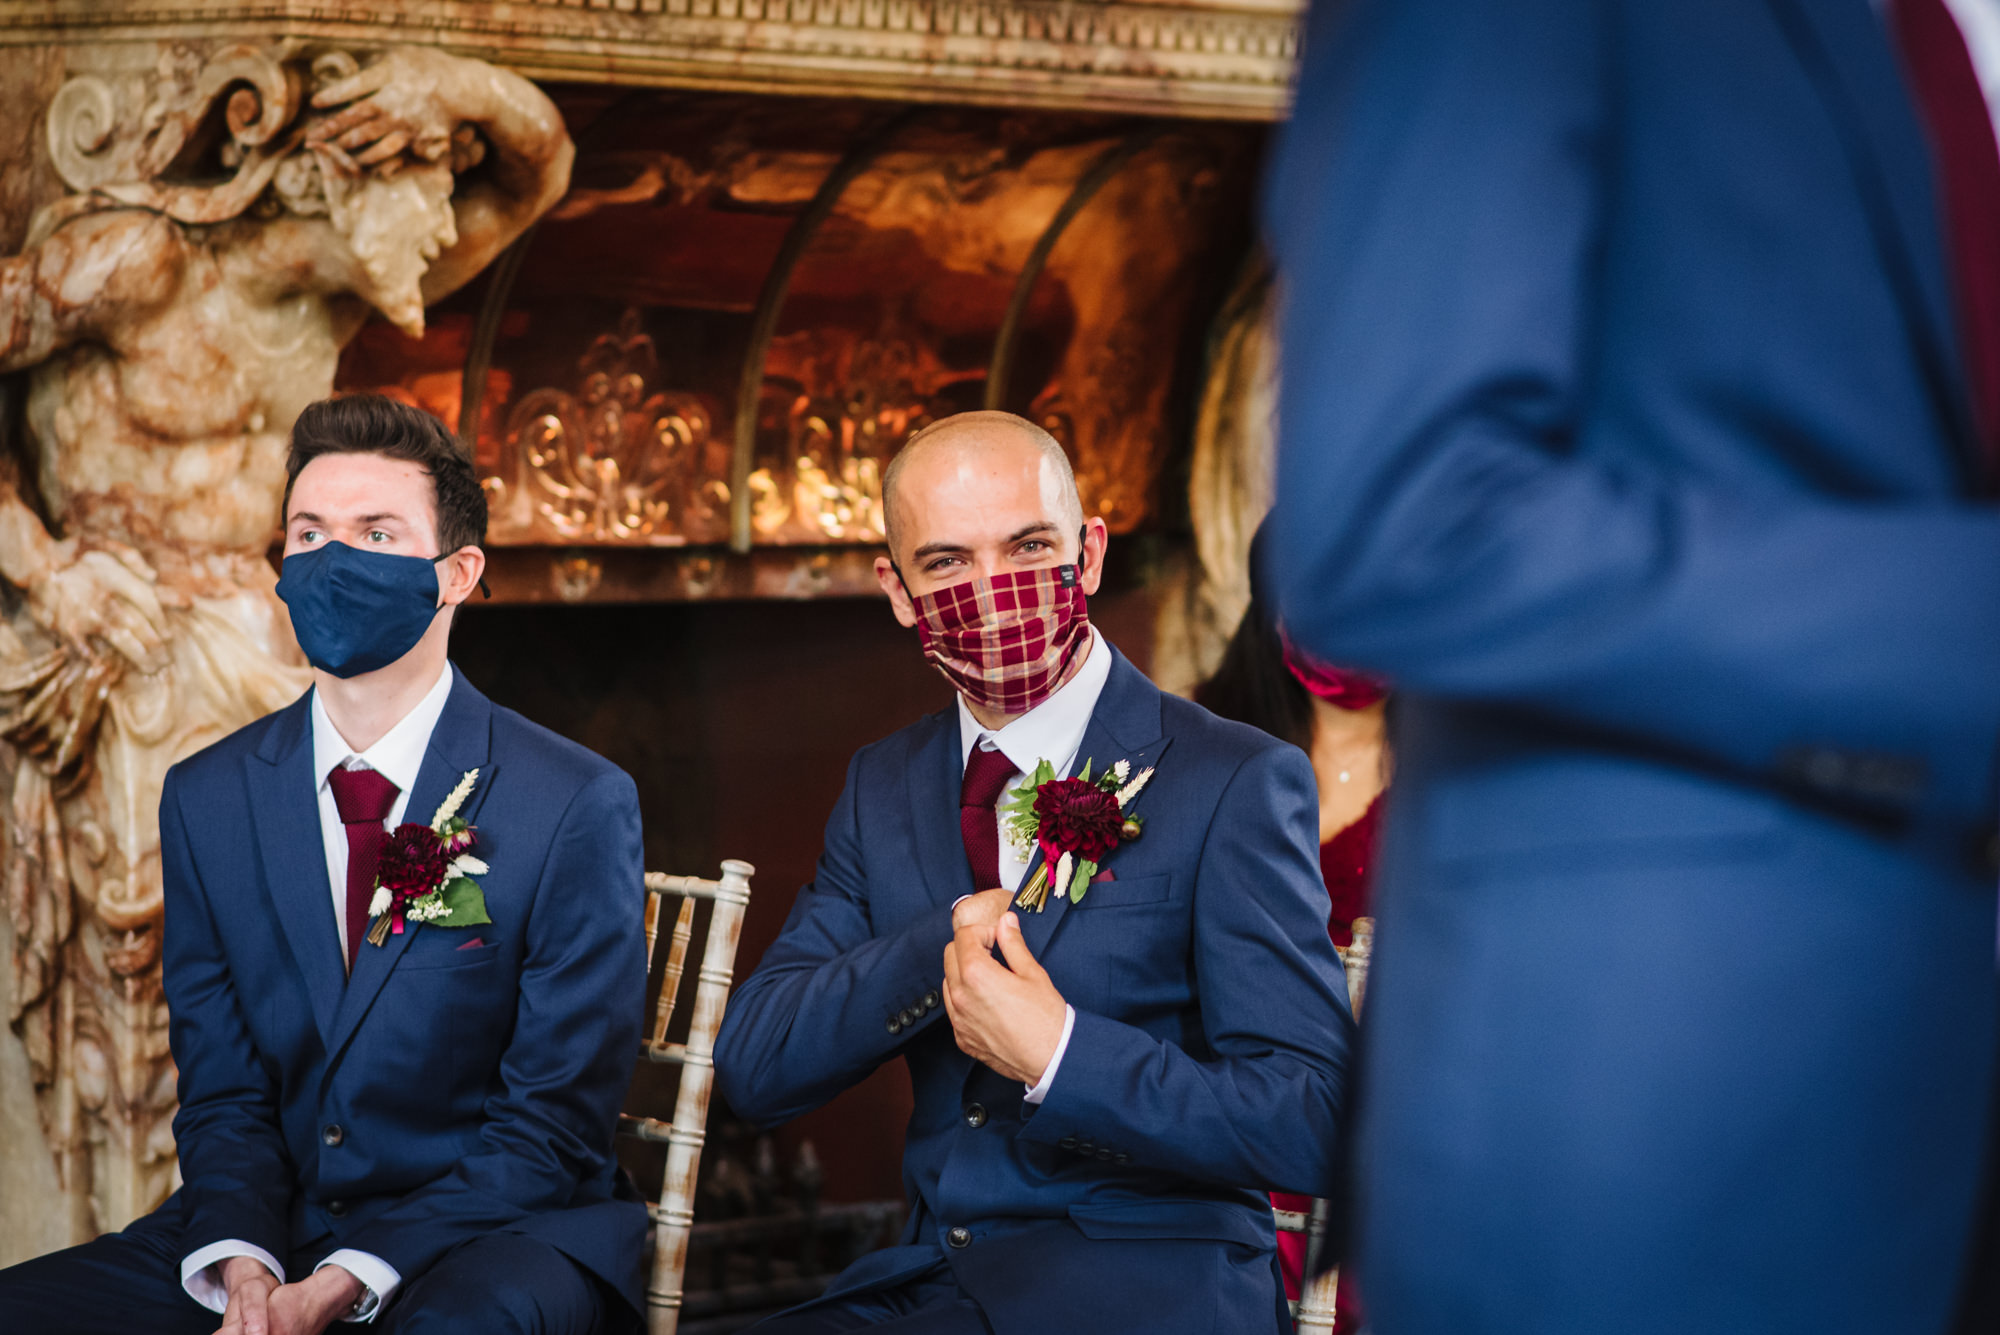 Masked guest peeps over at London wedding photographer